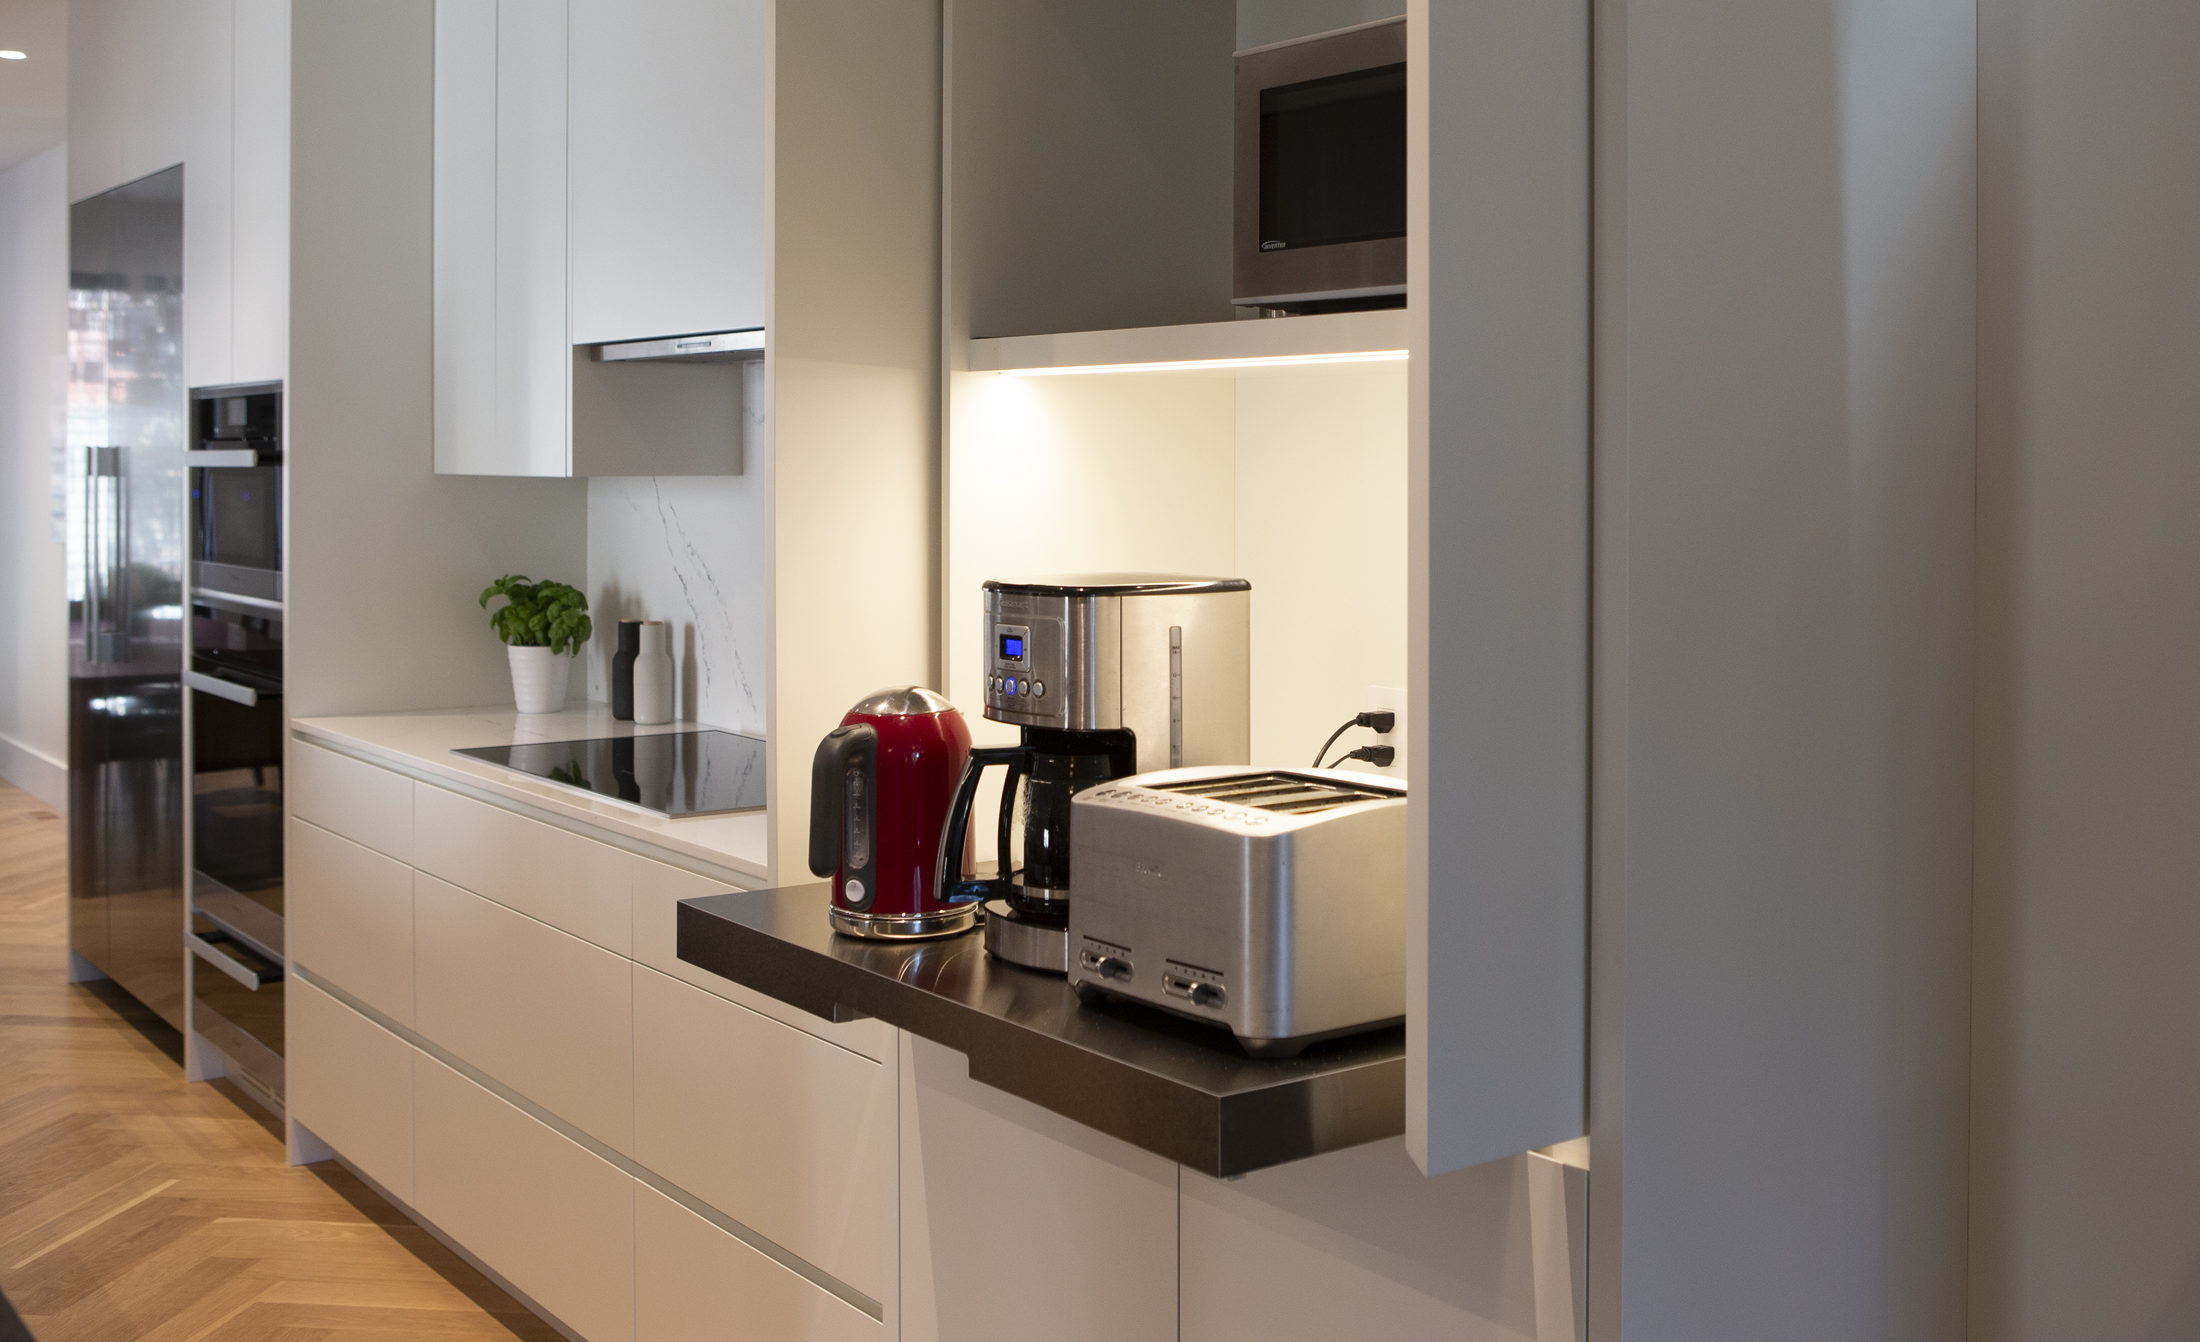 Playter-Estates-House-modern-kitchen-wth-pull-out-cabinets-for-appliances